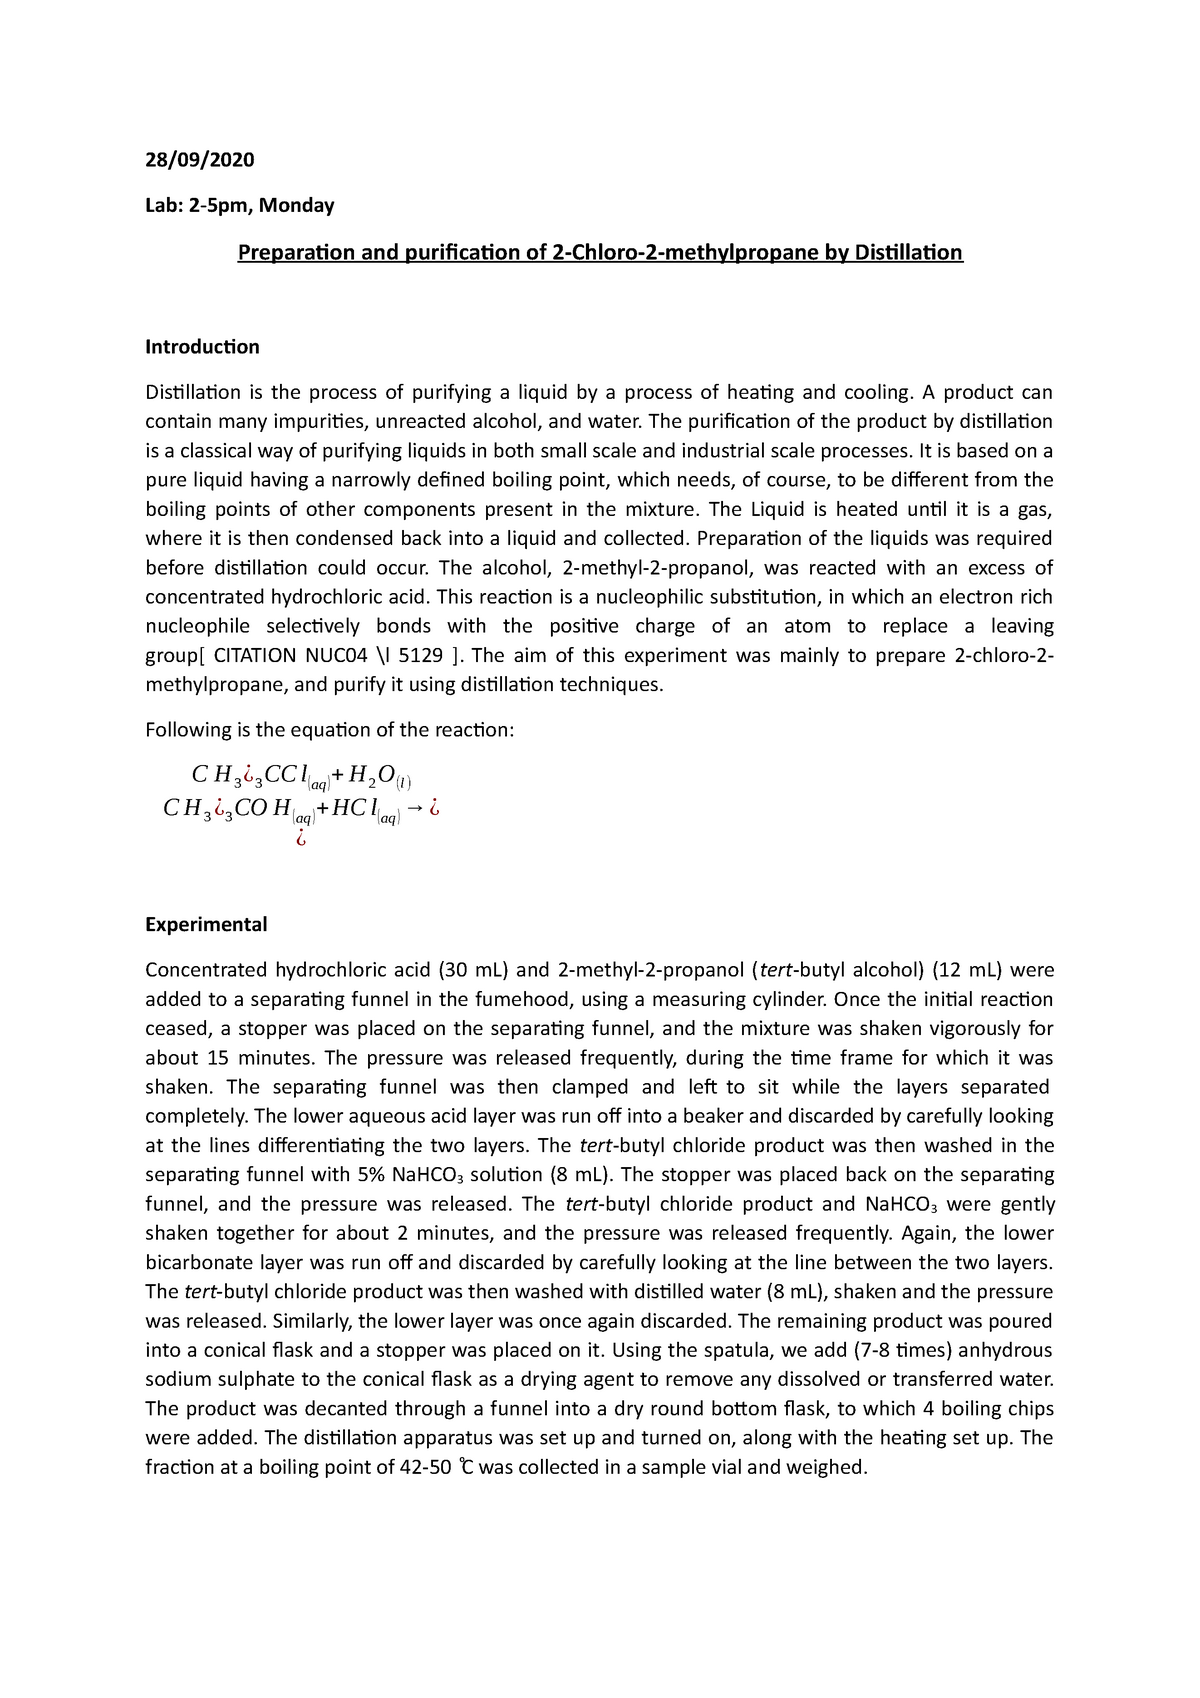 Lab report 9 - Exp 9 Preparation and purification of 2-Chloro-2 ...